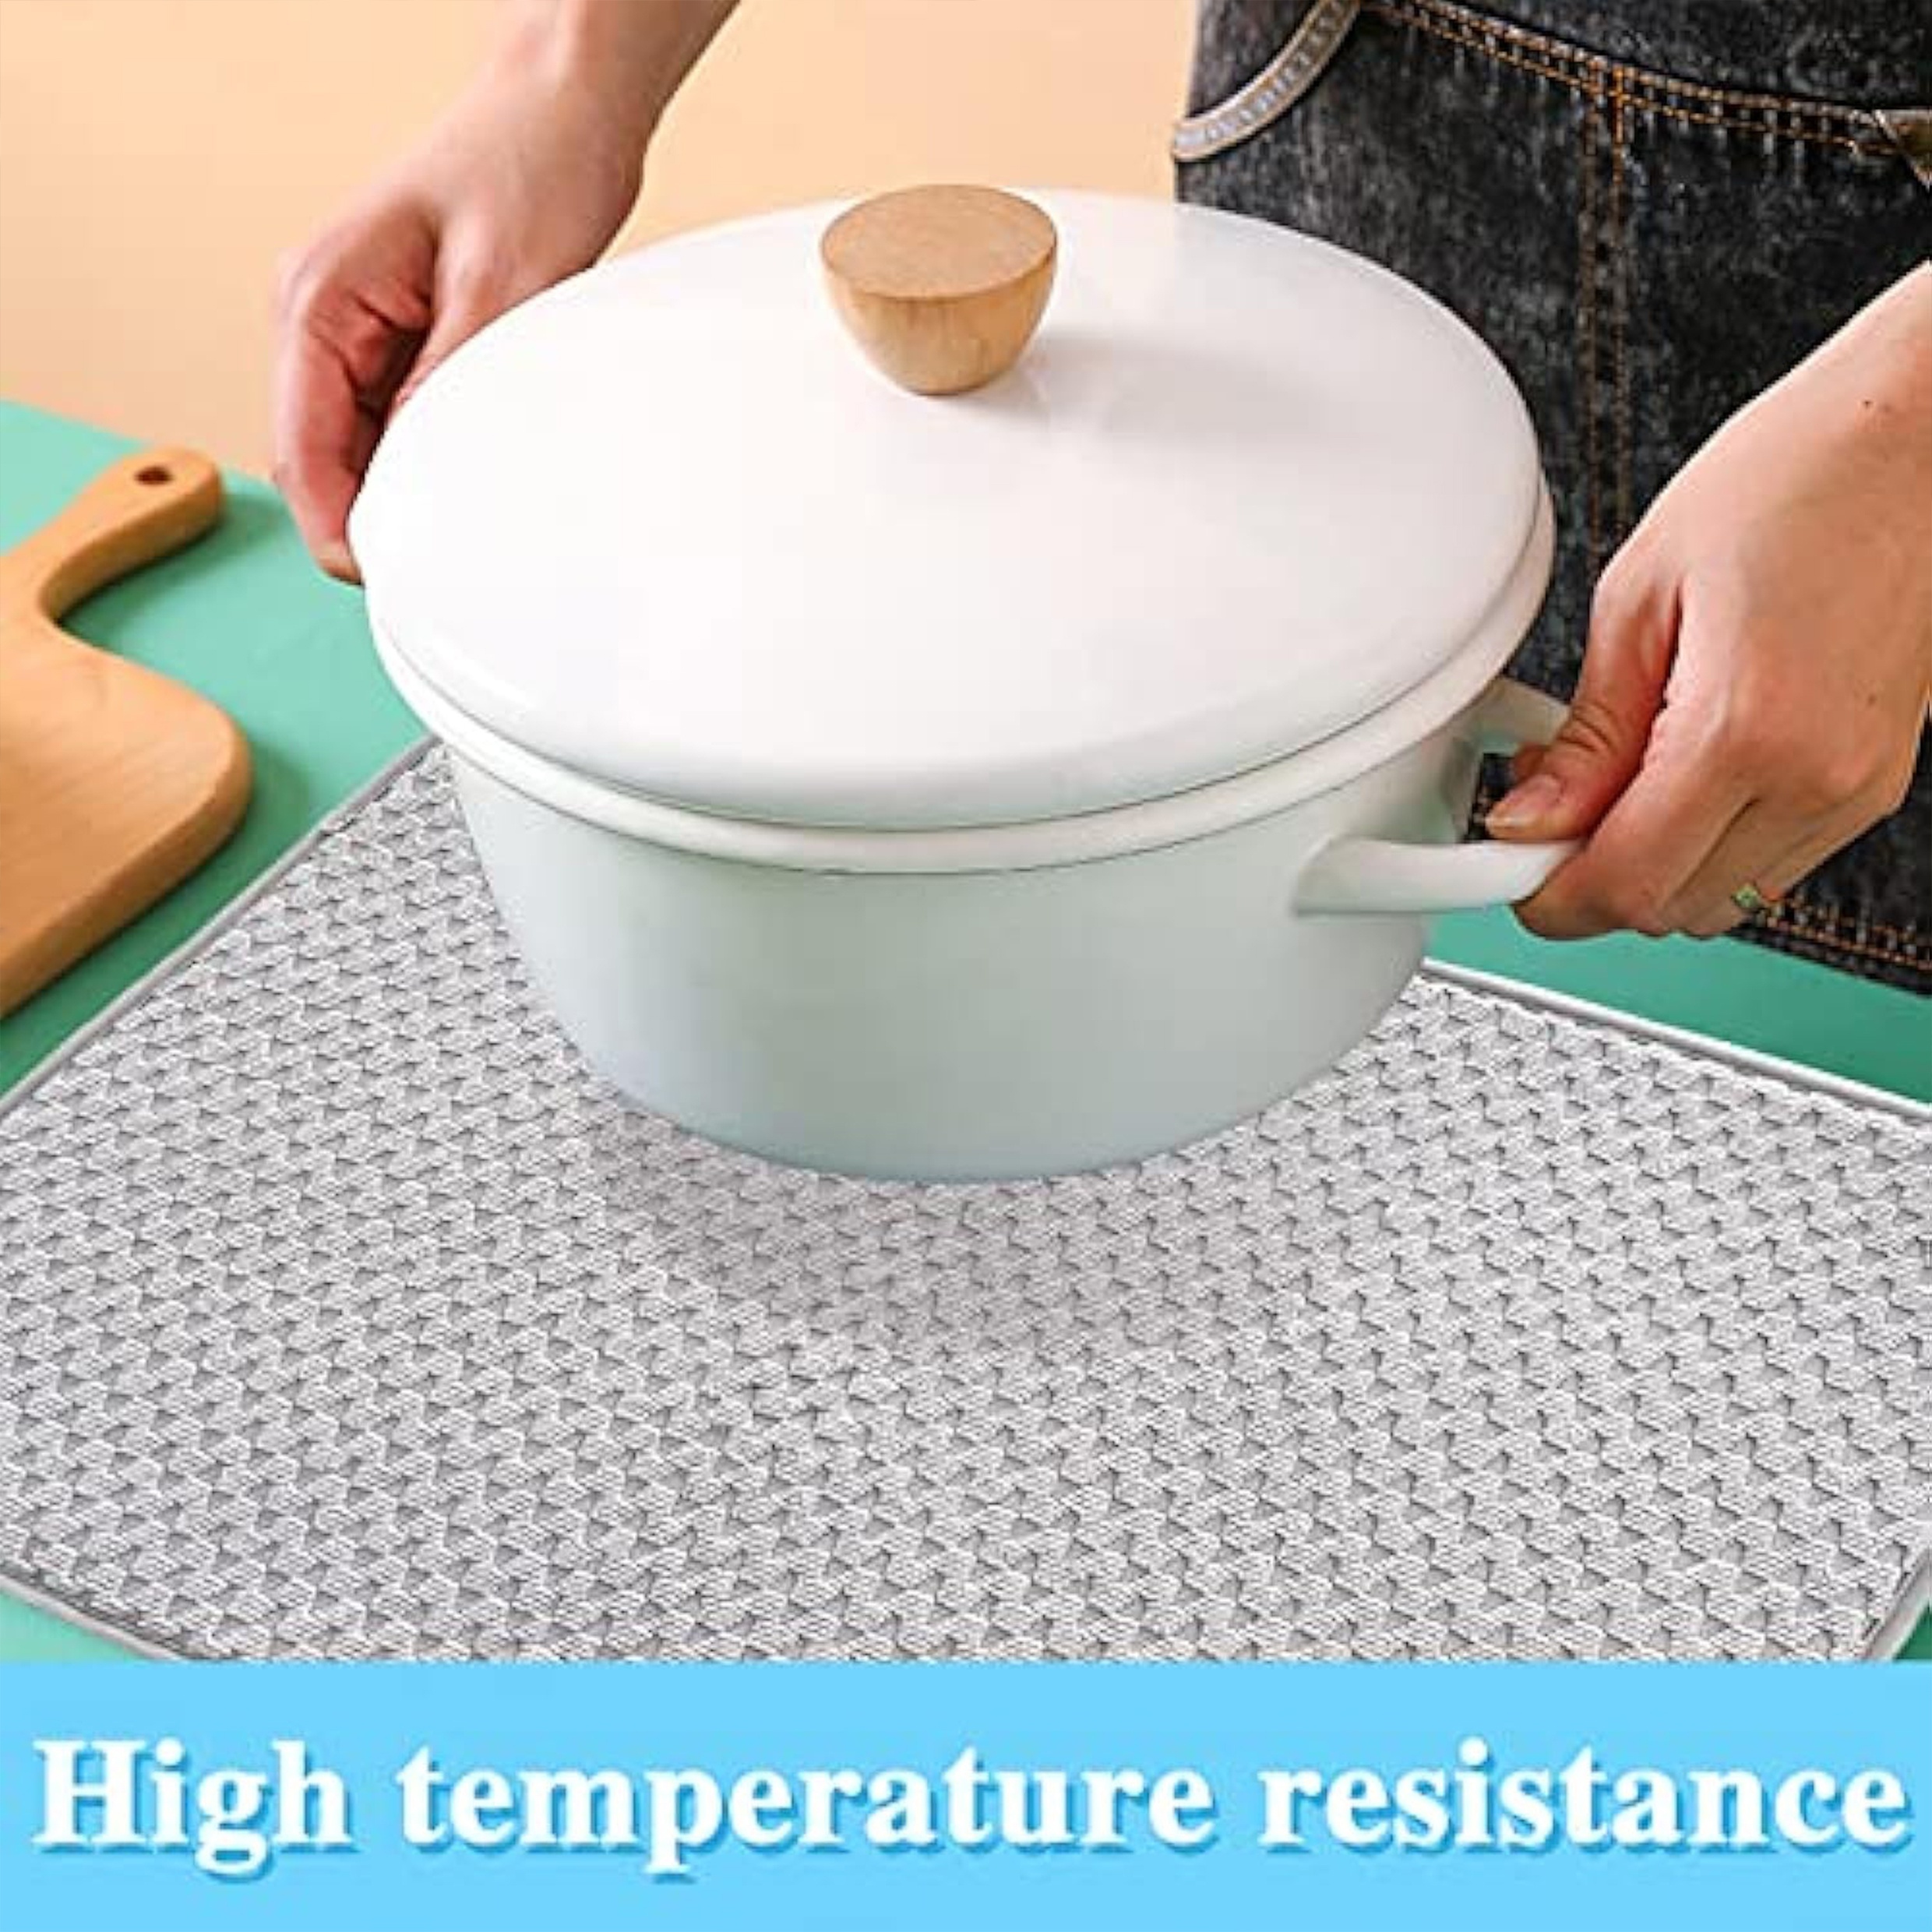 Dish Drying Mat, Absorbent Microfiber Dishes Drainer Mats for Kitchen  Counter , Large Size Dish Drying Pad, 20'' x 15'' (blue)